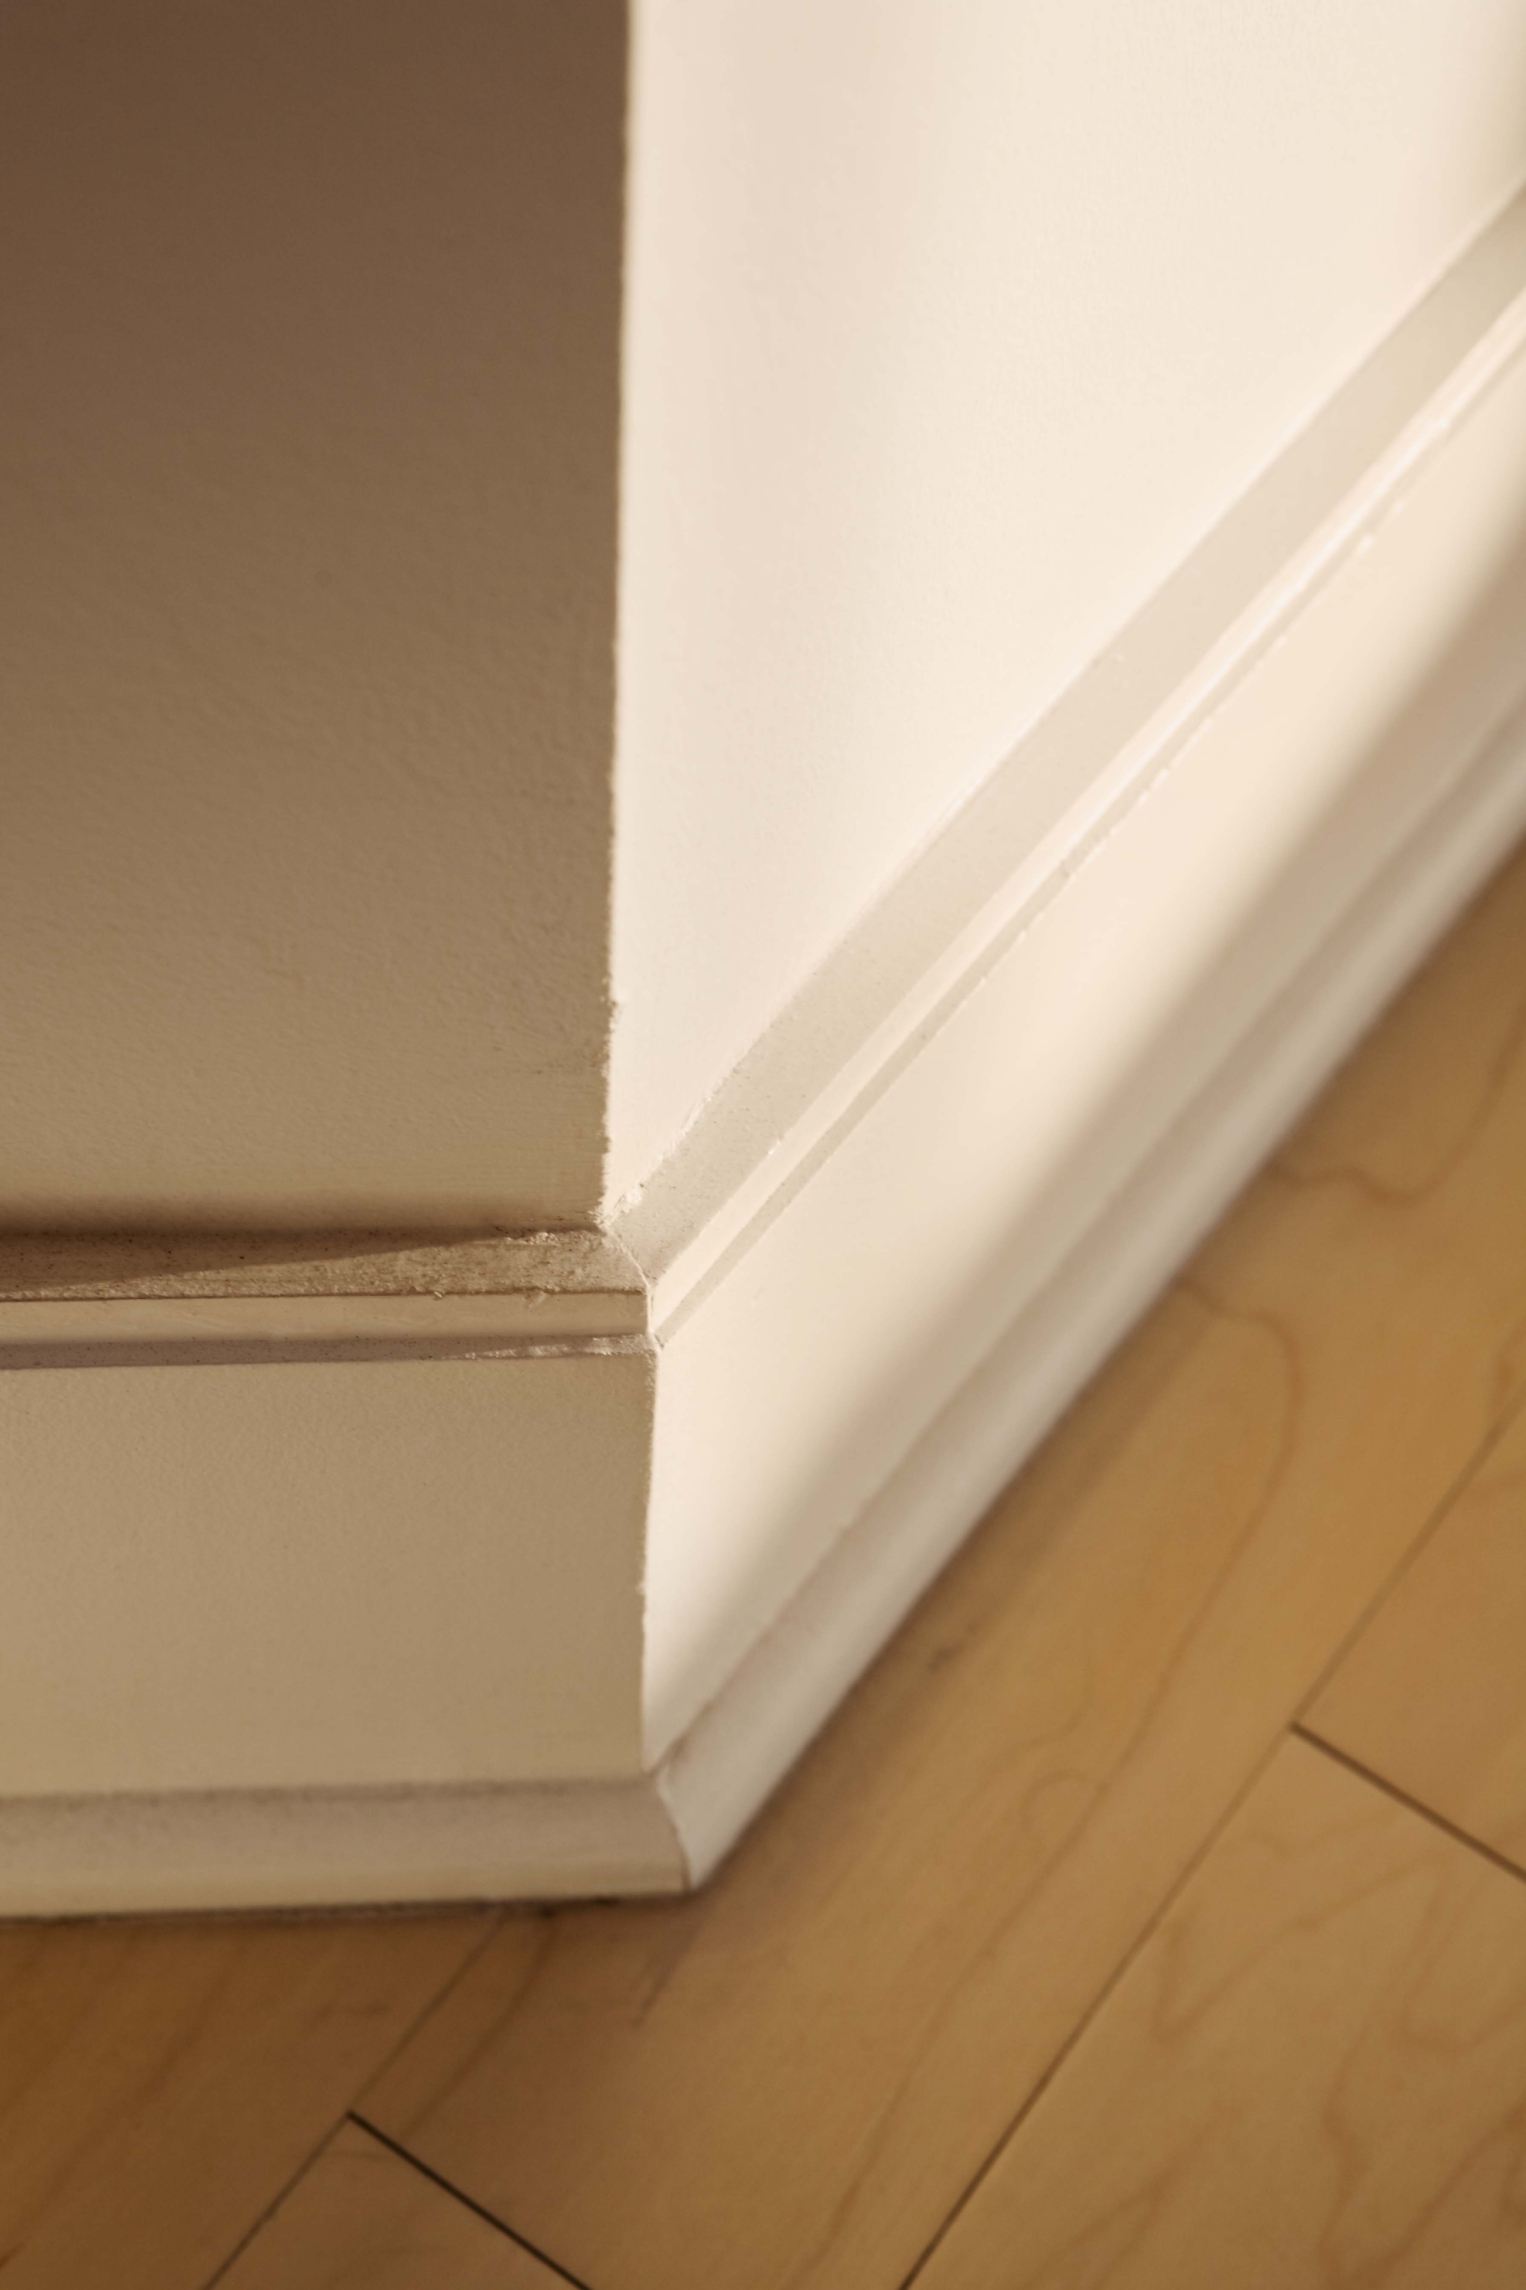 How To Cut A Baseboard On Uneven Floors Hunker